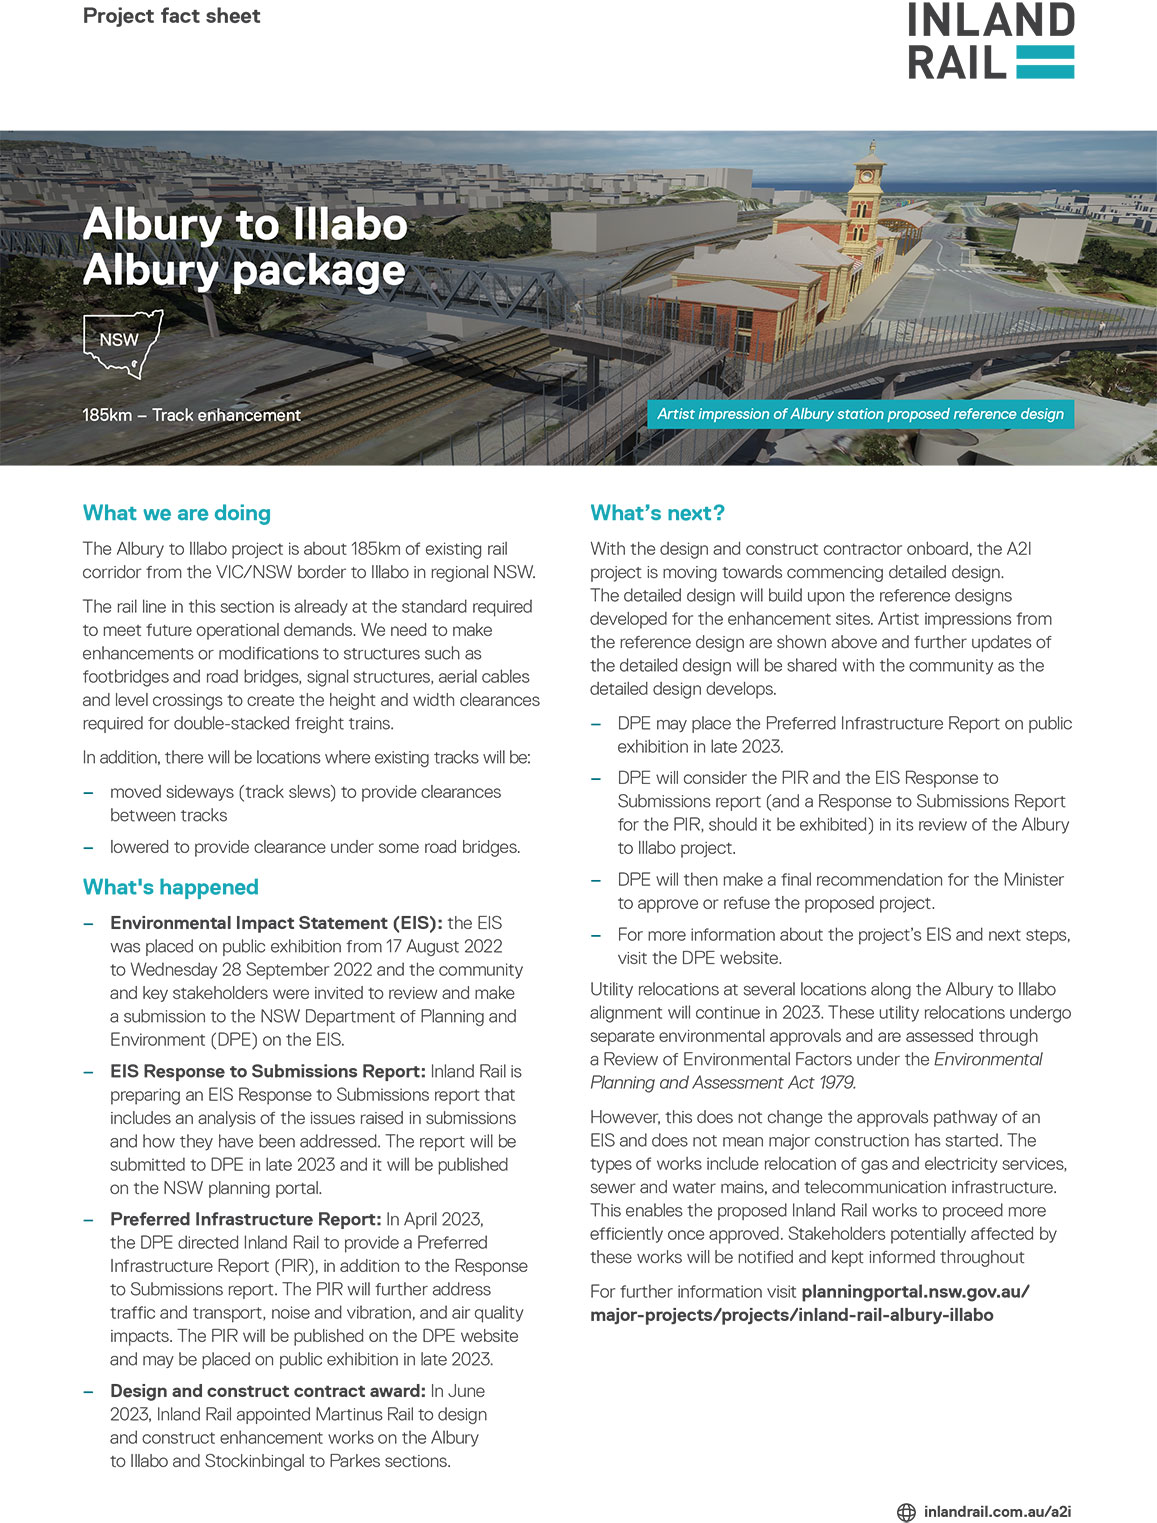 Image thumbnail for Albury to Illabo – Albury package project fact sheet